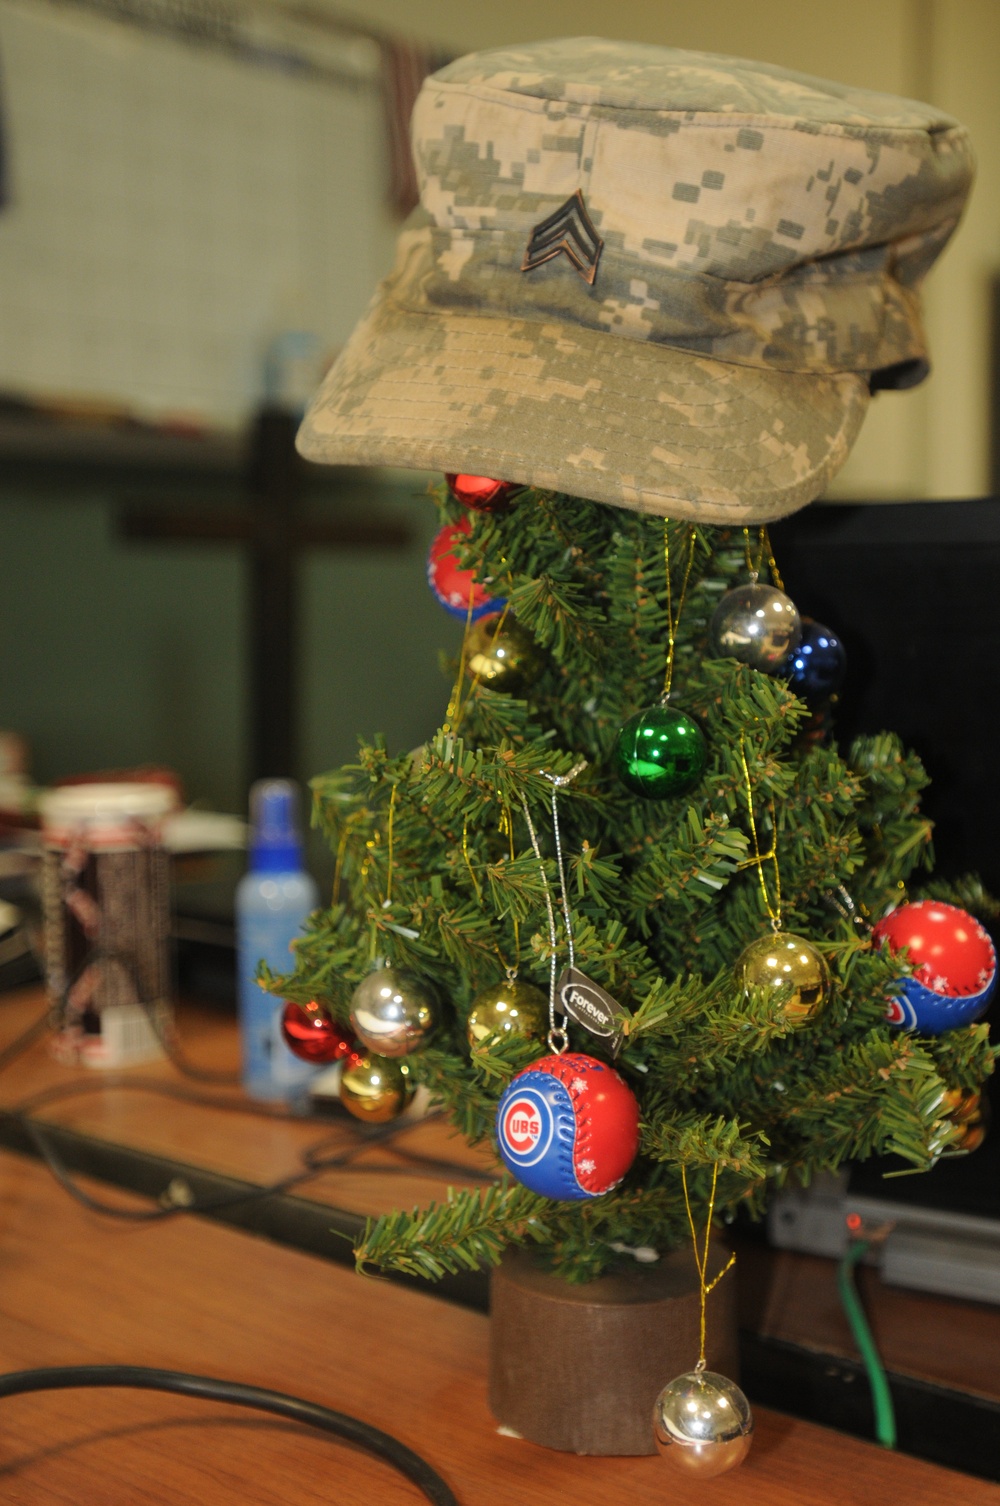 Stateside support groups send Christmas trees to JJB troops